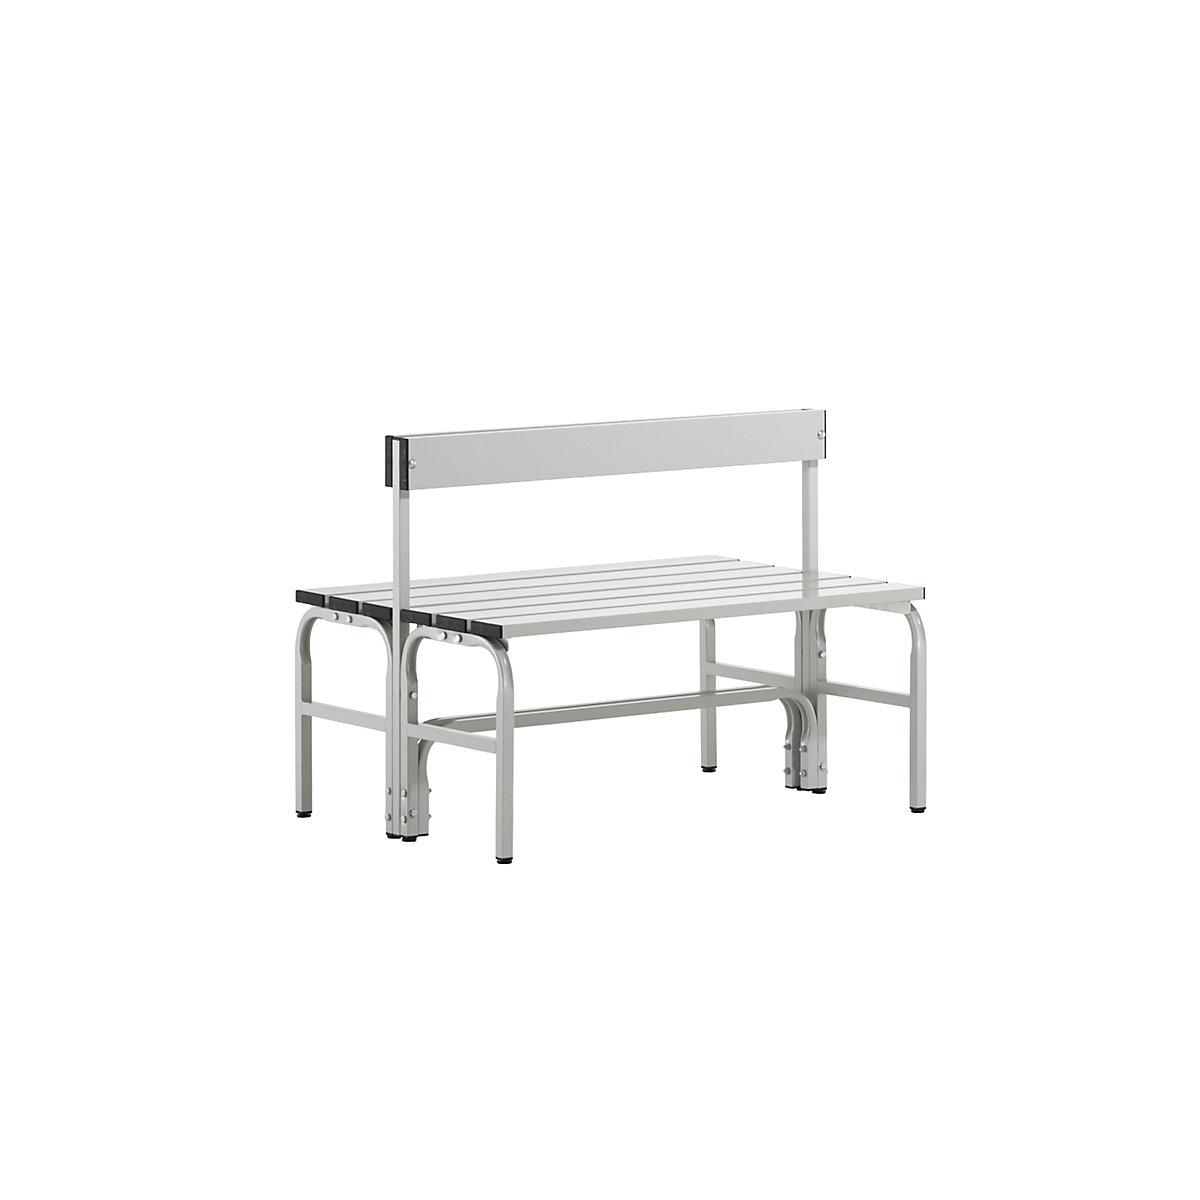 Sypro – Half height cloakroom bench with back rest, double sided, aluminium, length 1015 mm, light grey